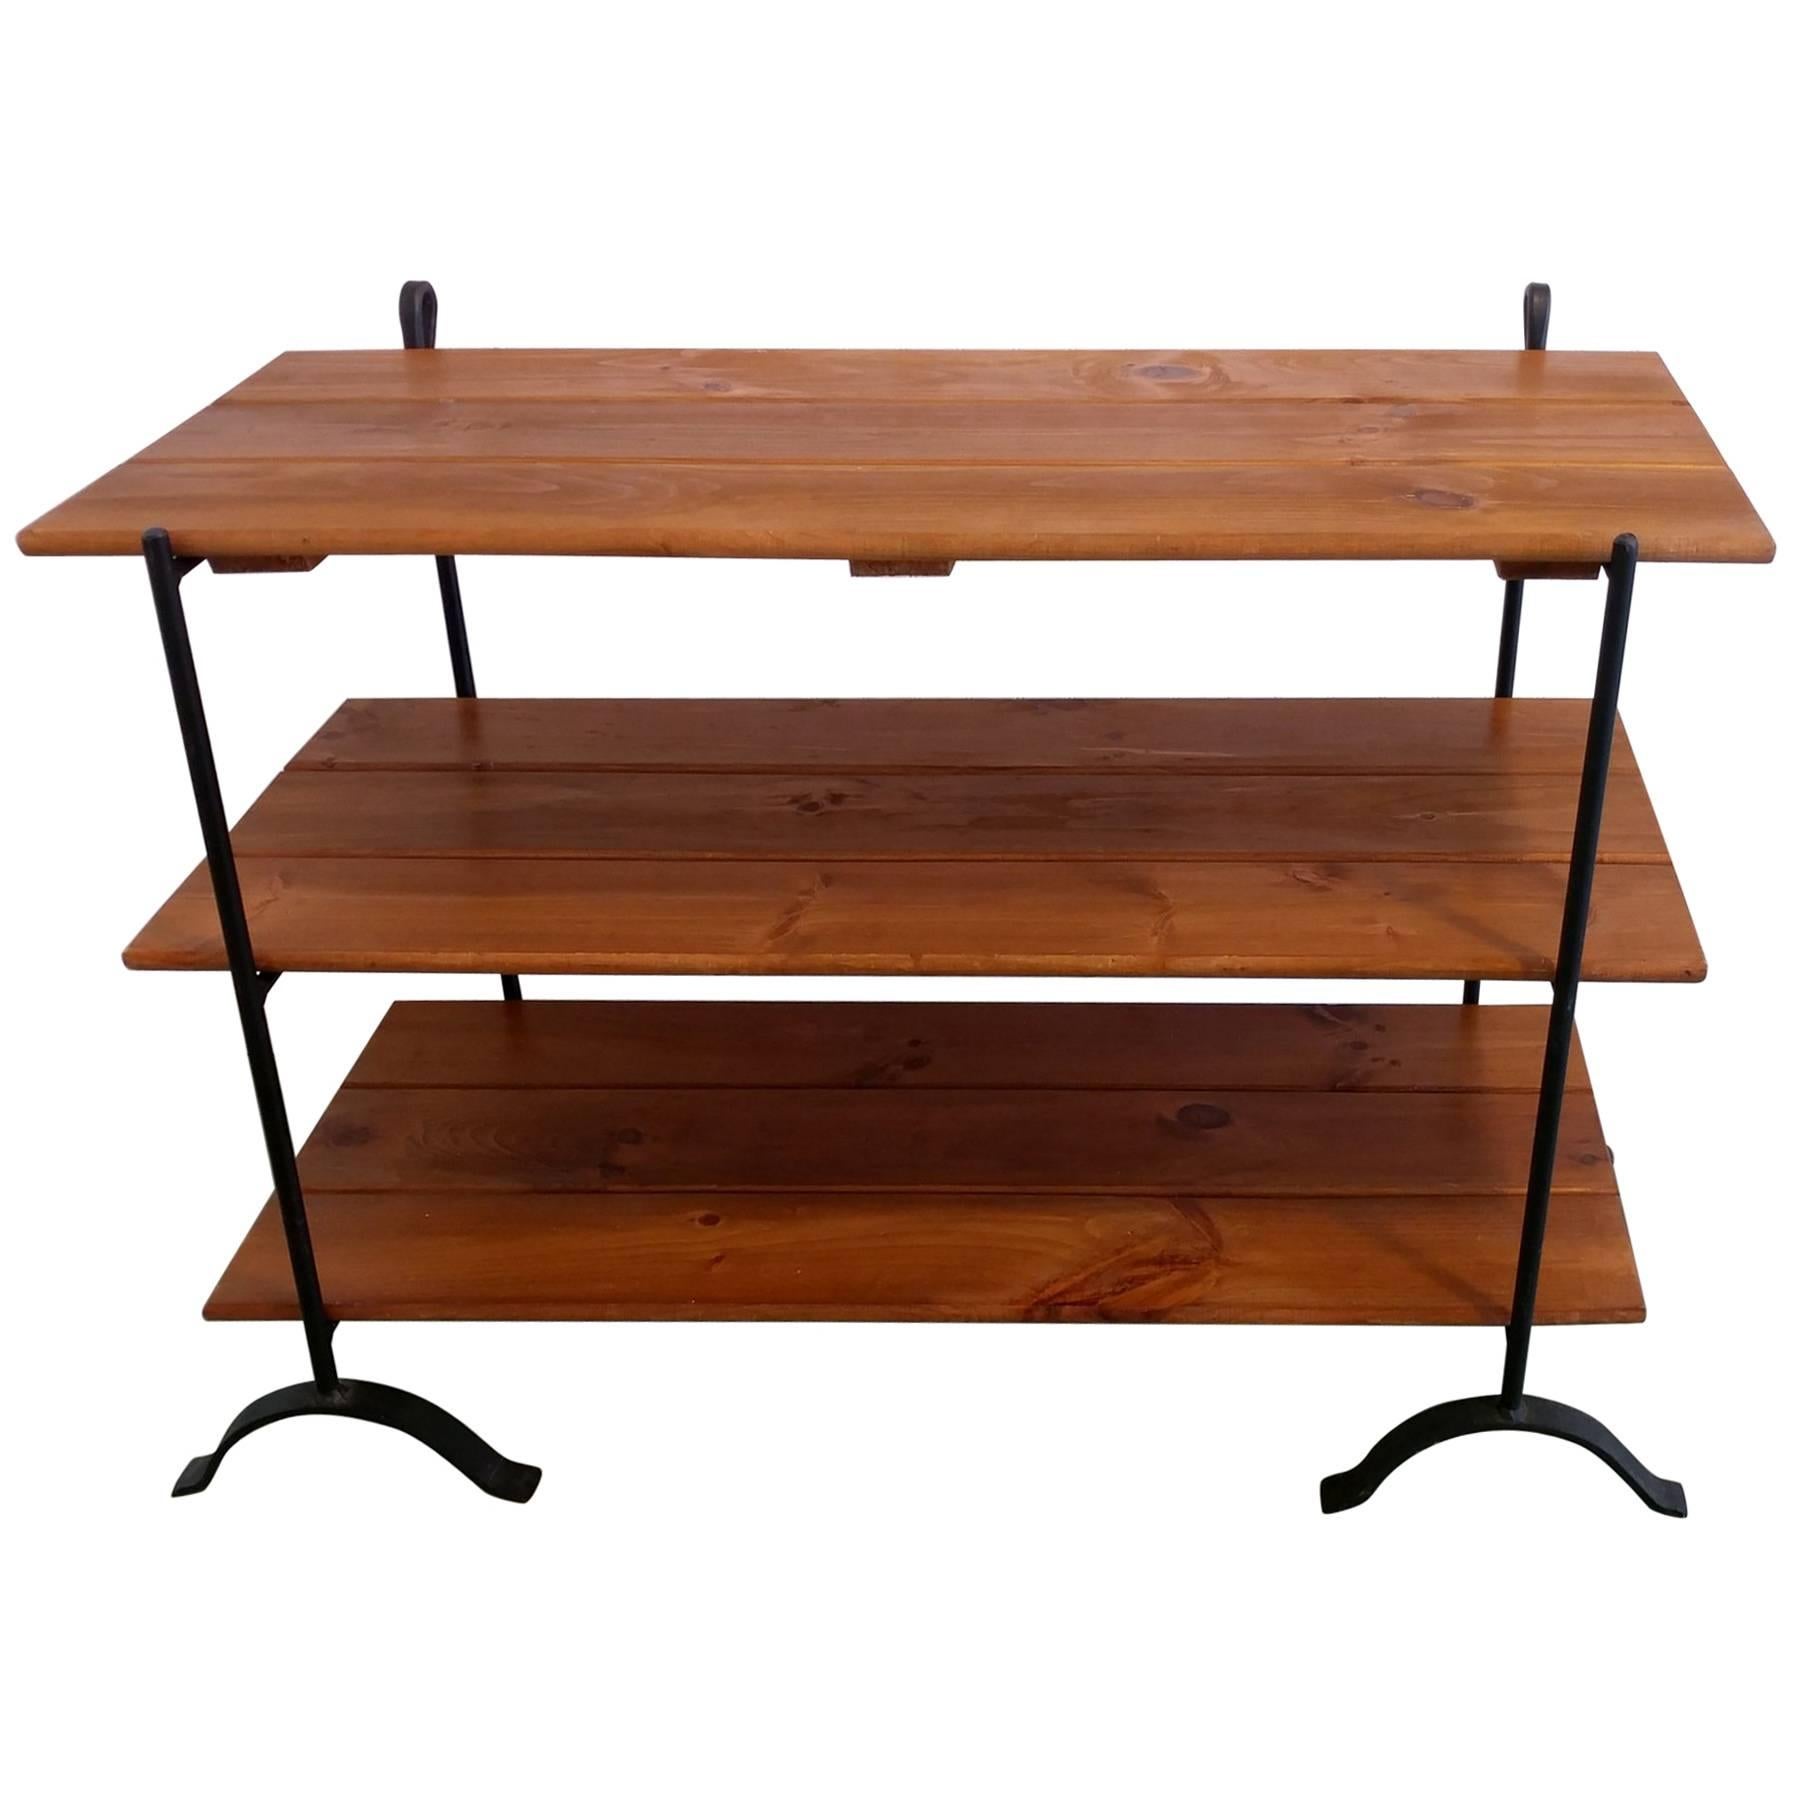 English Trestle Console Table with Removable Shelves, Offered by La Porte For Sale